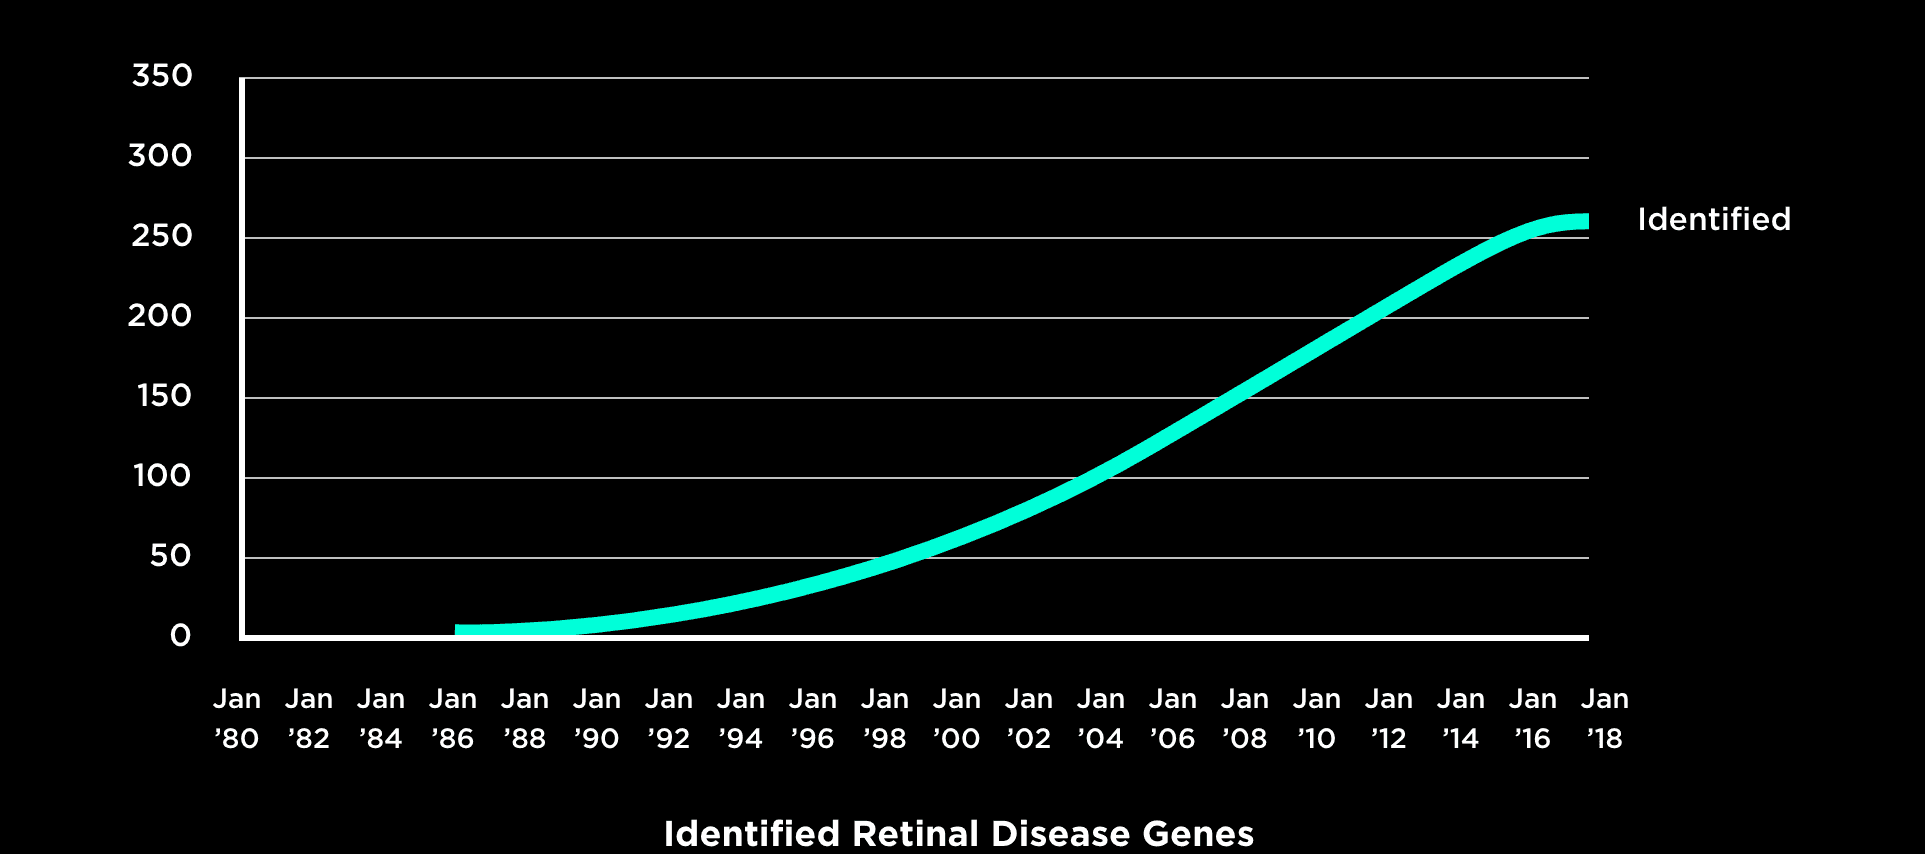 A line graph showing identified retinal disease genes increasing from 0 in January 1988 to 270 in January 2018.